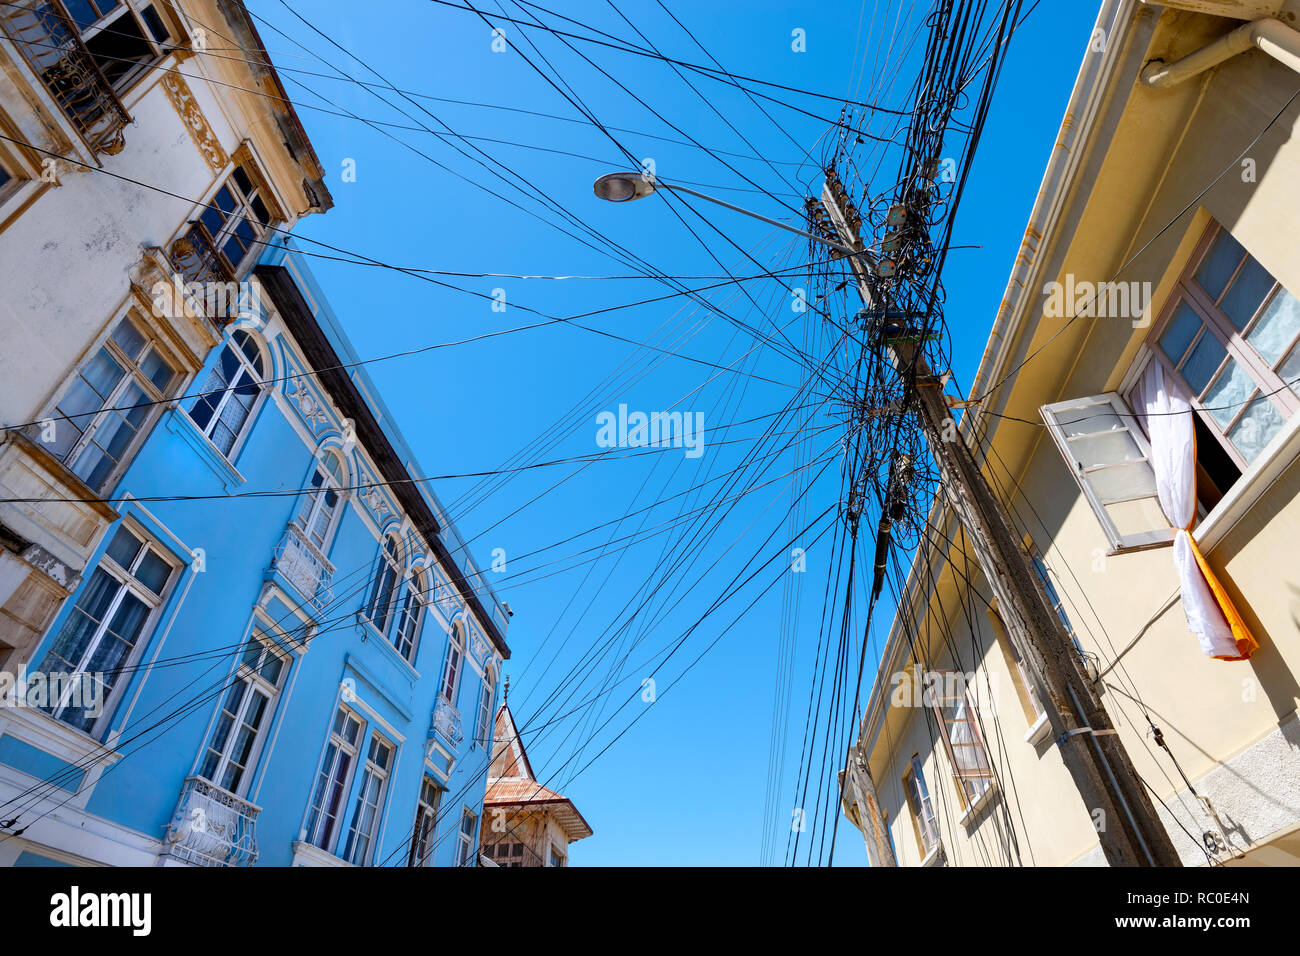 A seemingly tangled and disorganised collection of overhead cables in a street in Valparaiso, Chile. Stock Photo